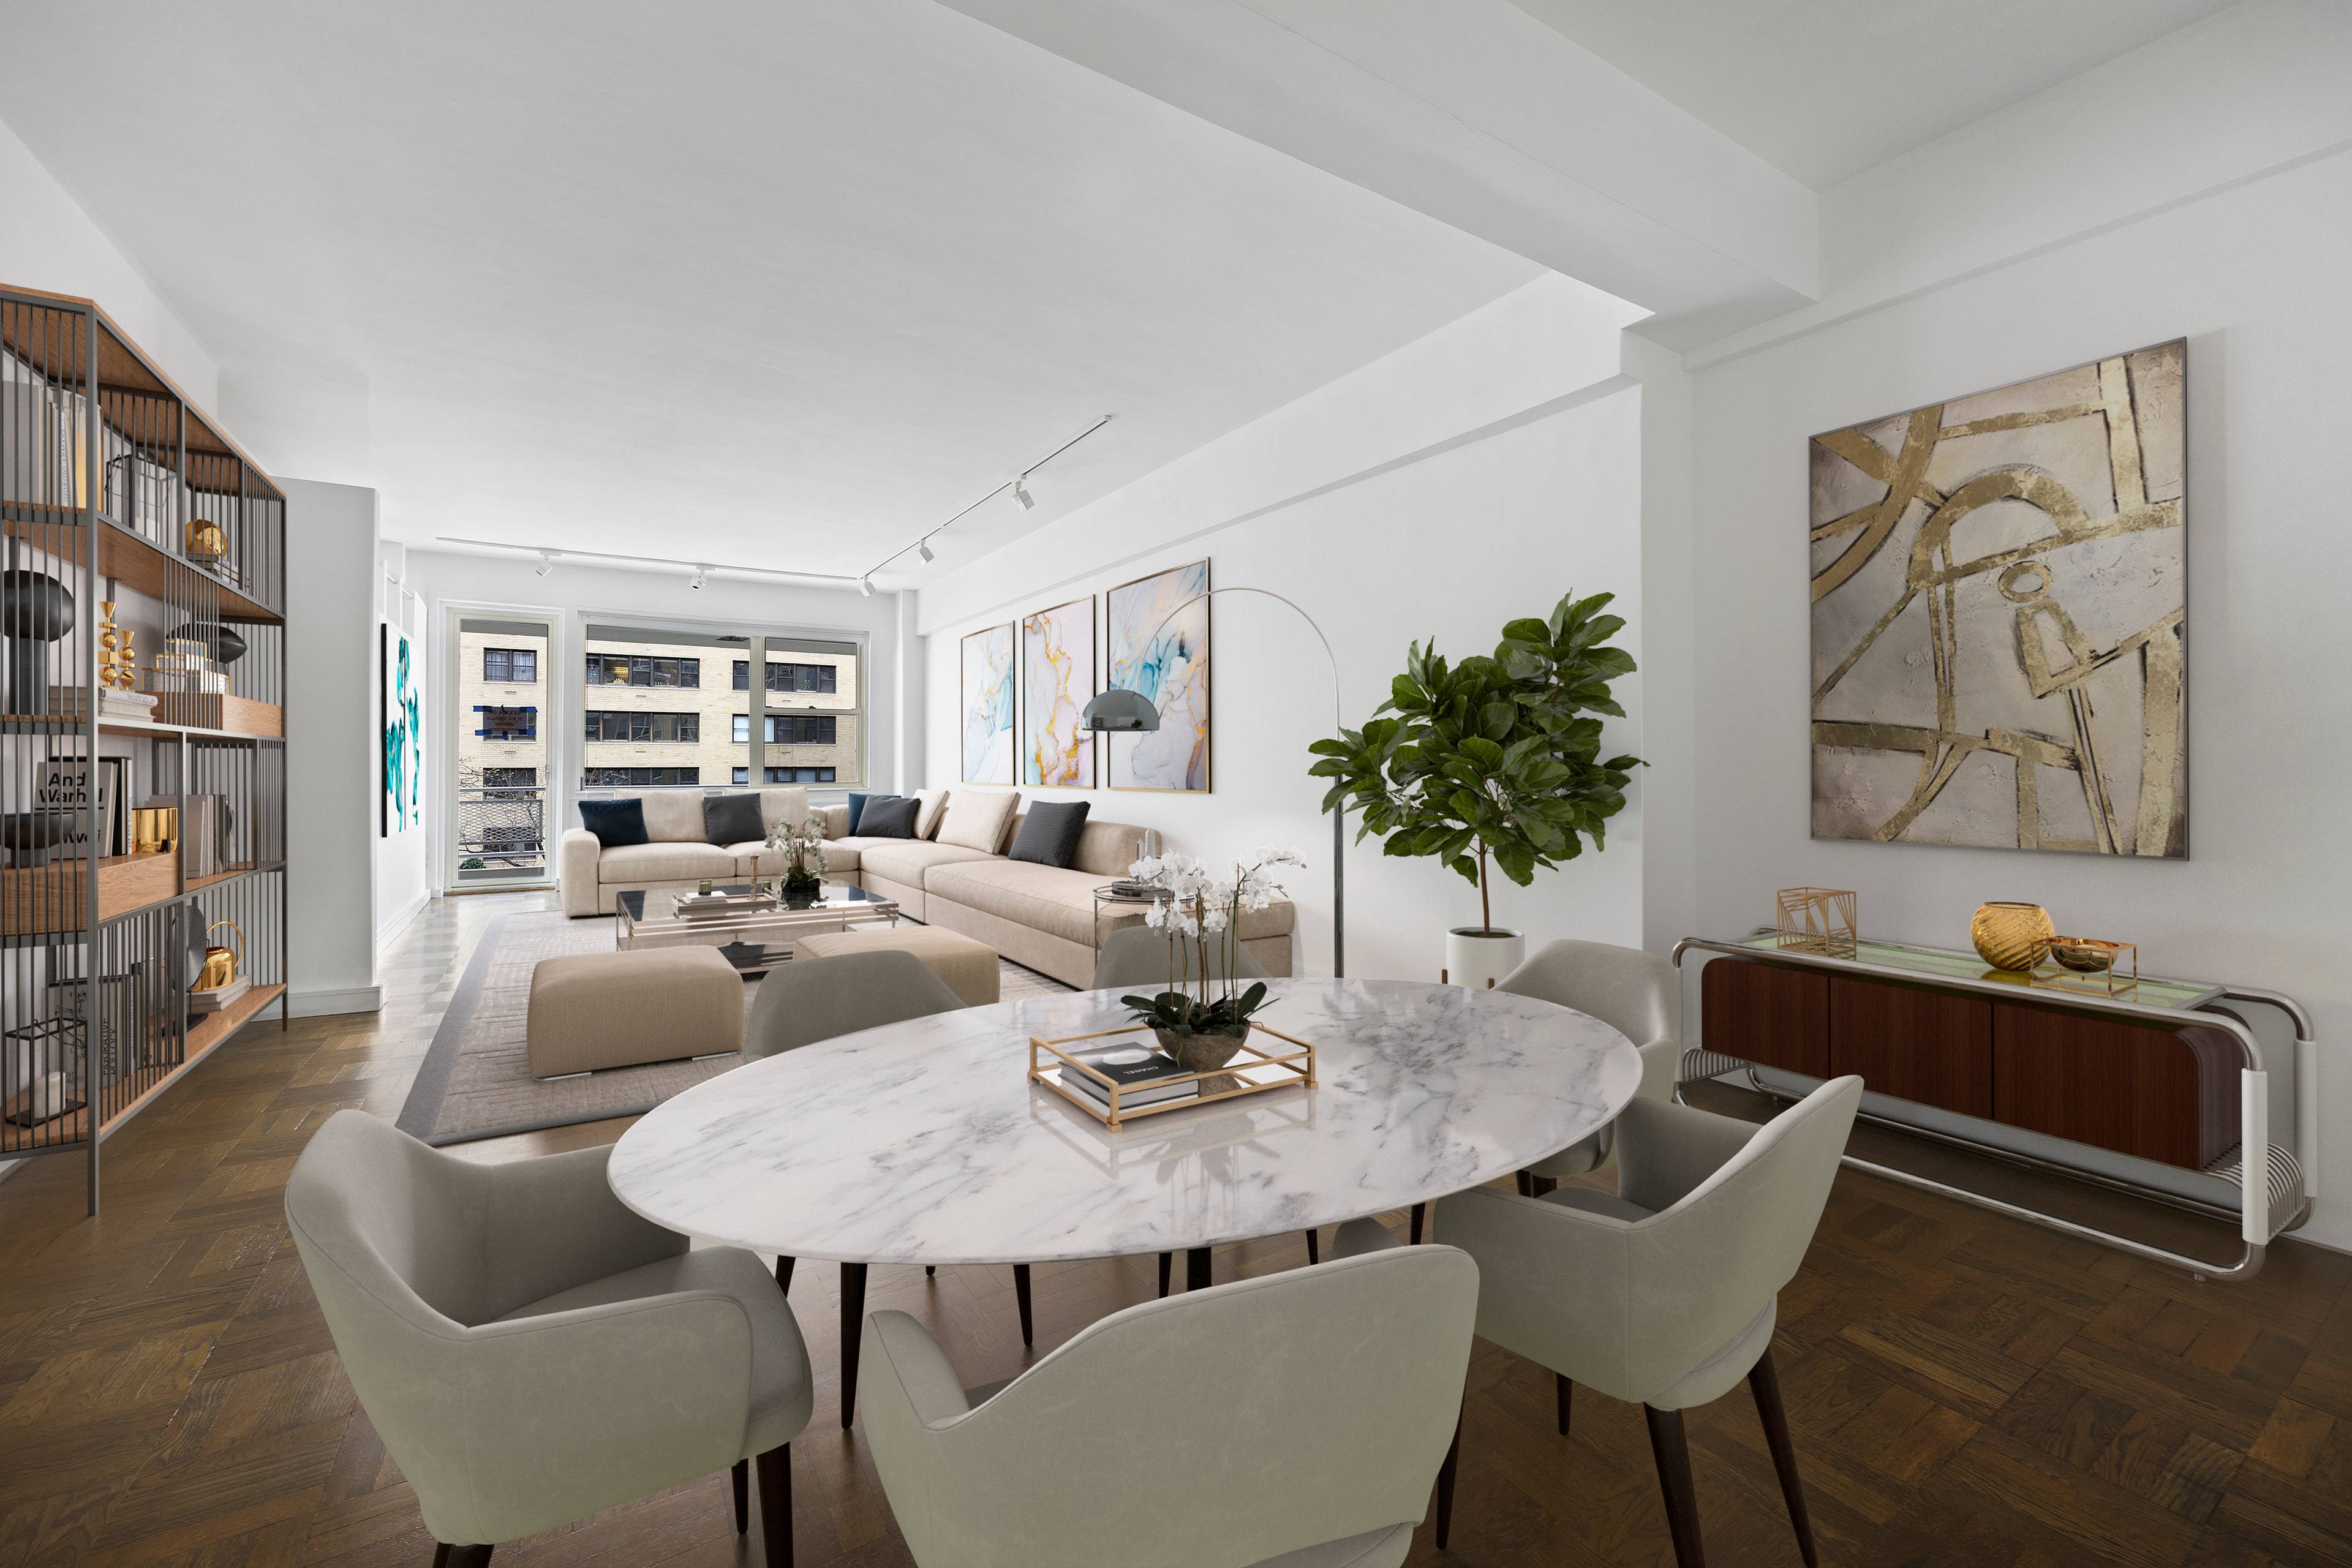 Welcome to apartment 3G, a renovated winged 2 Bedroom, 1 Bathroom home convertible to 2 baths w board approval located in Greenwich Village's, full service boutique co op, The Sheridan.